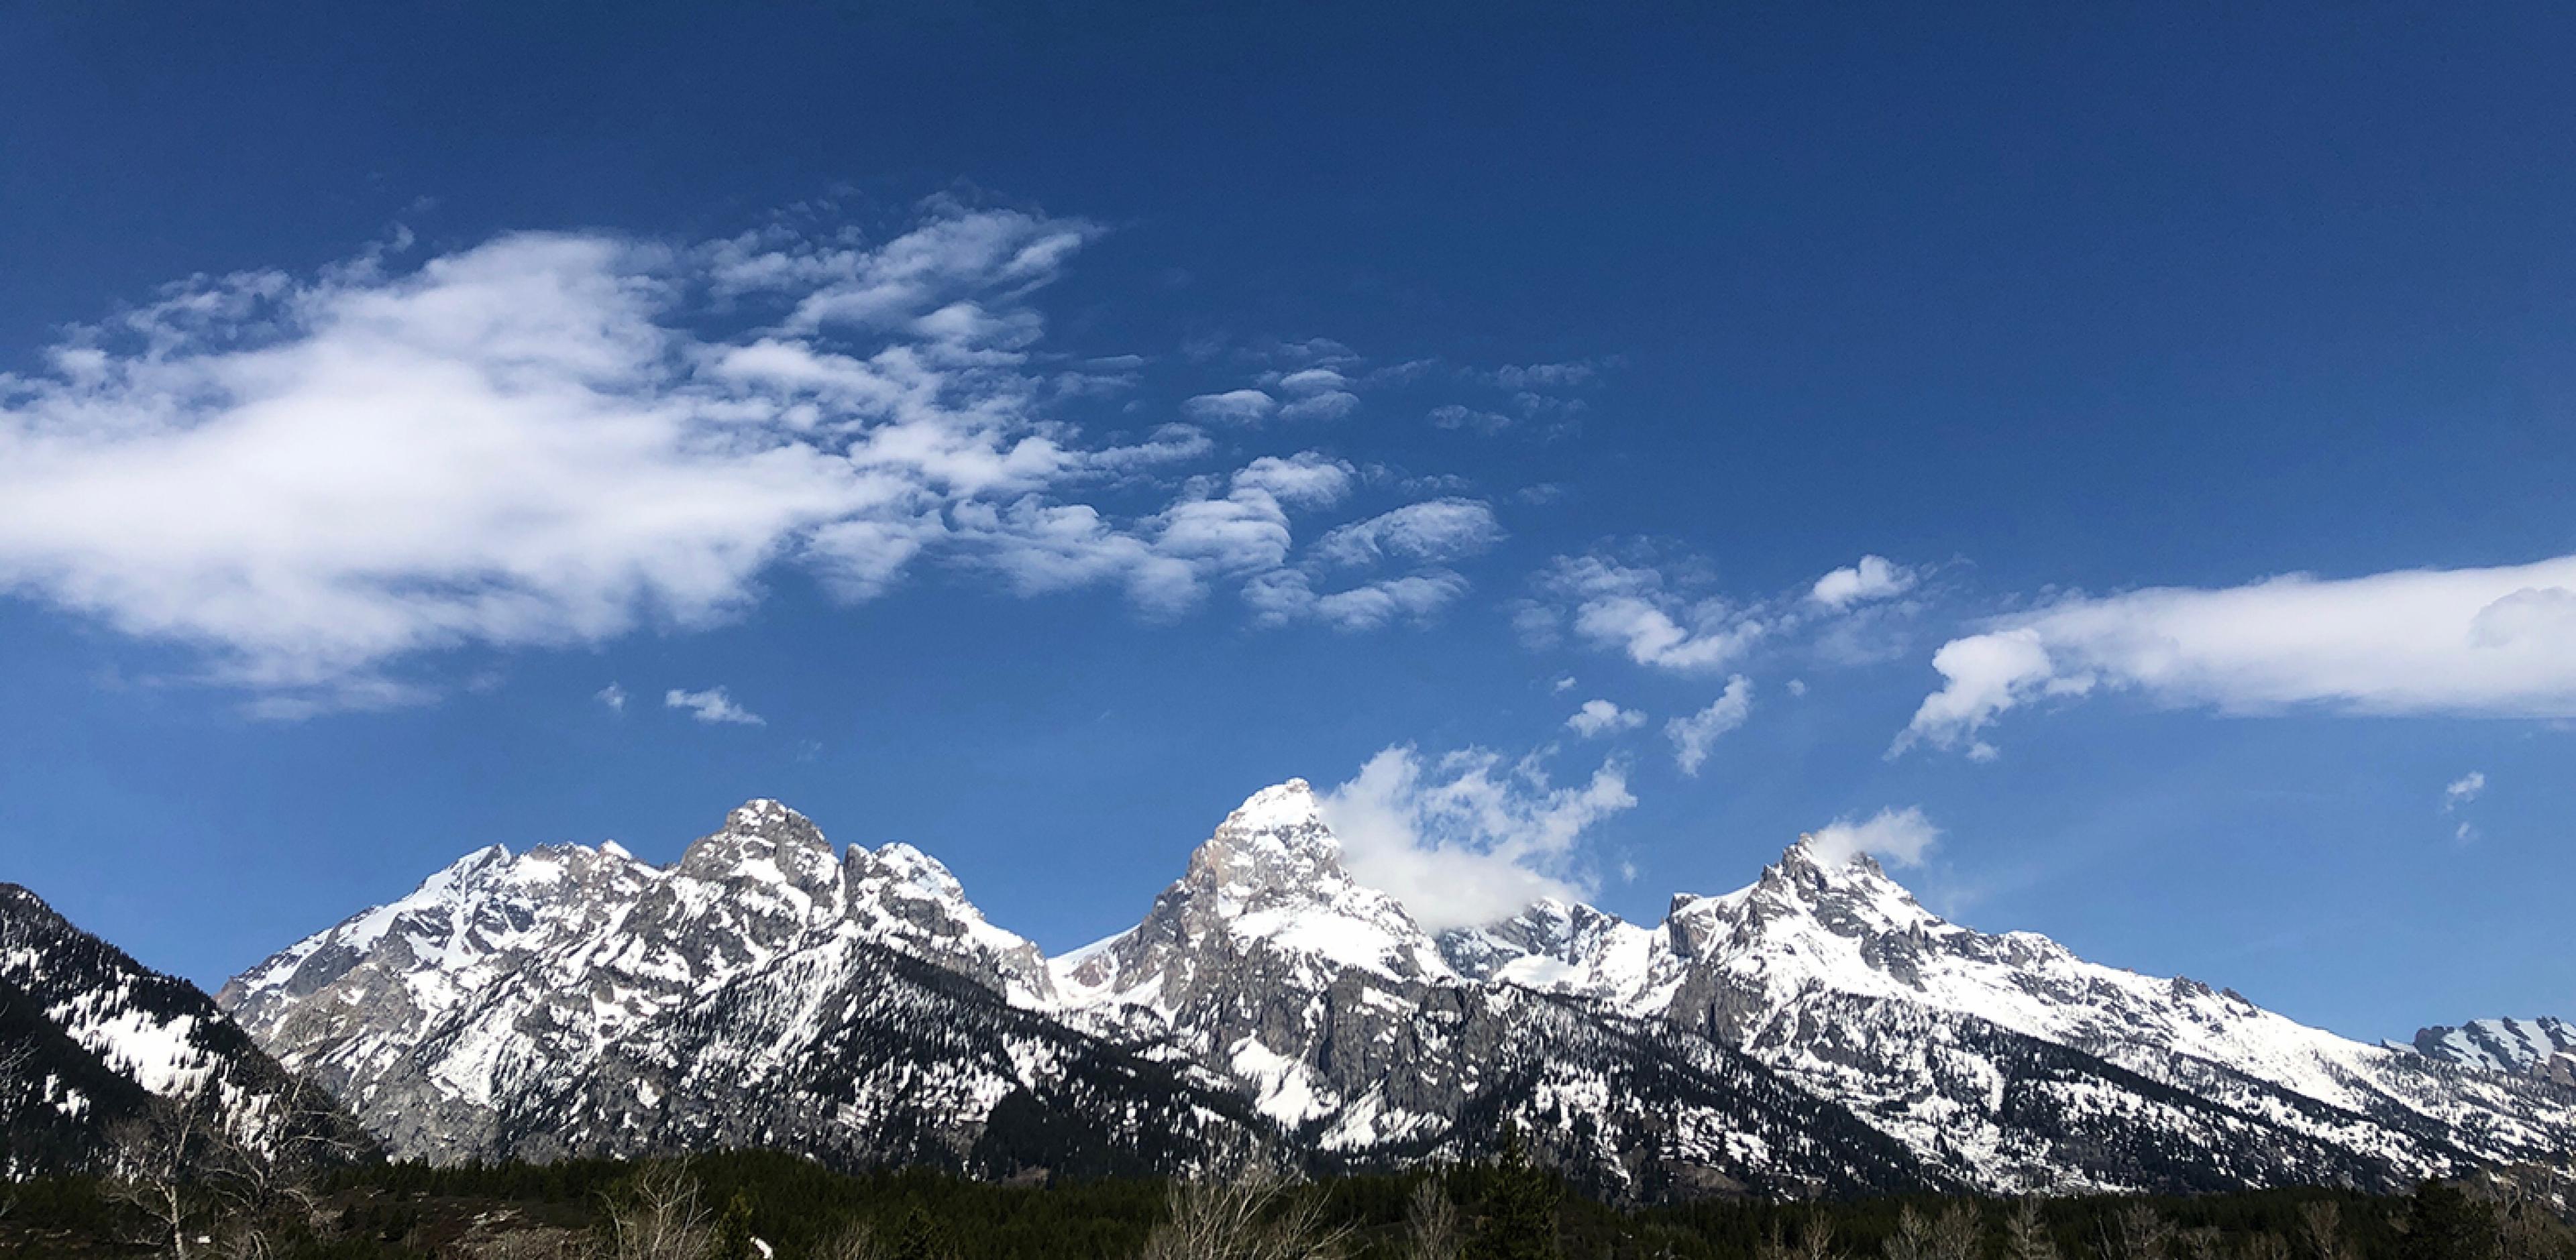 mountains in jackson hole wyoming with snow on top